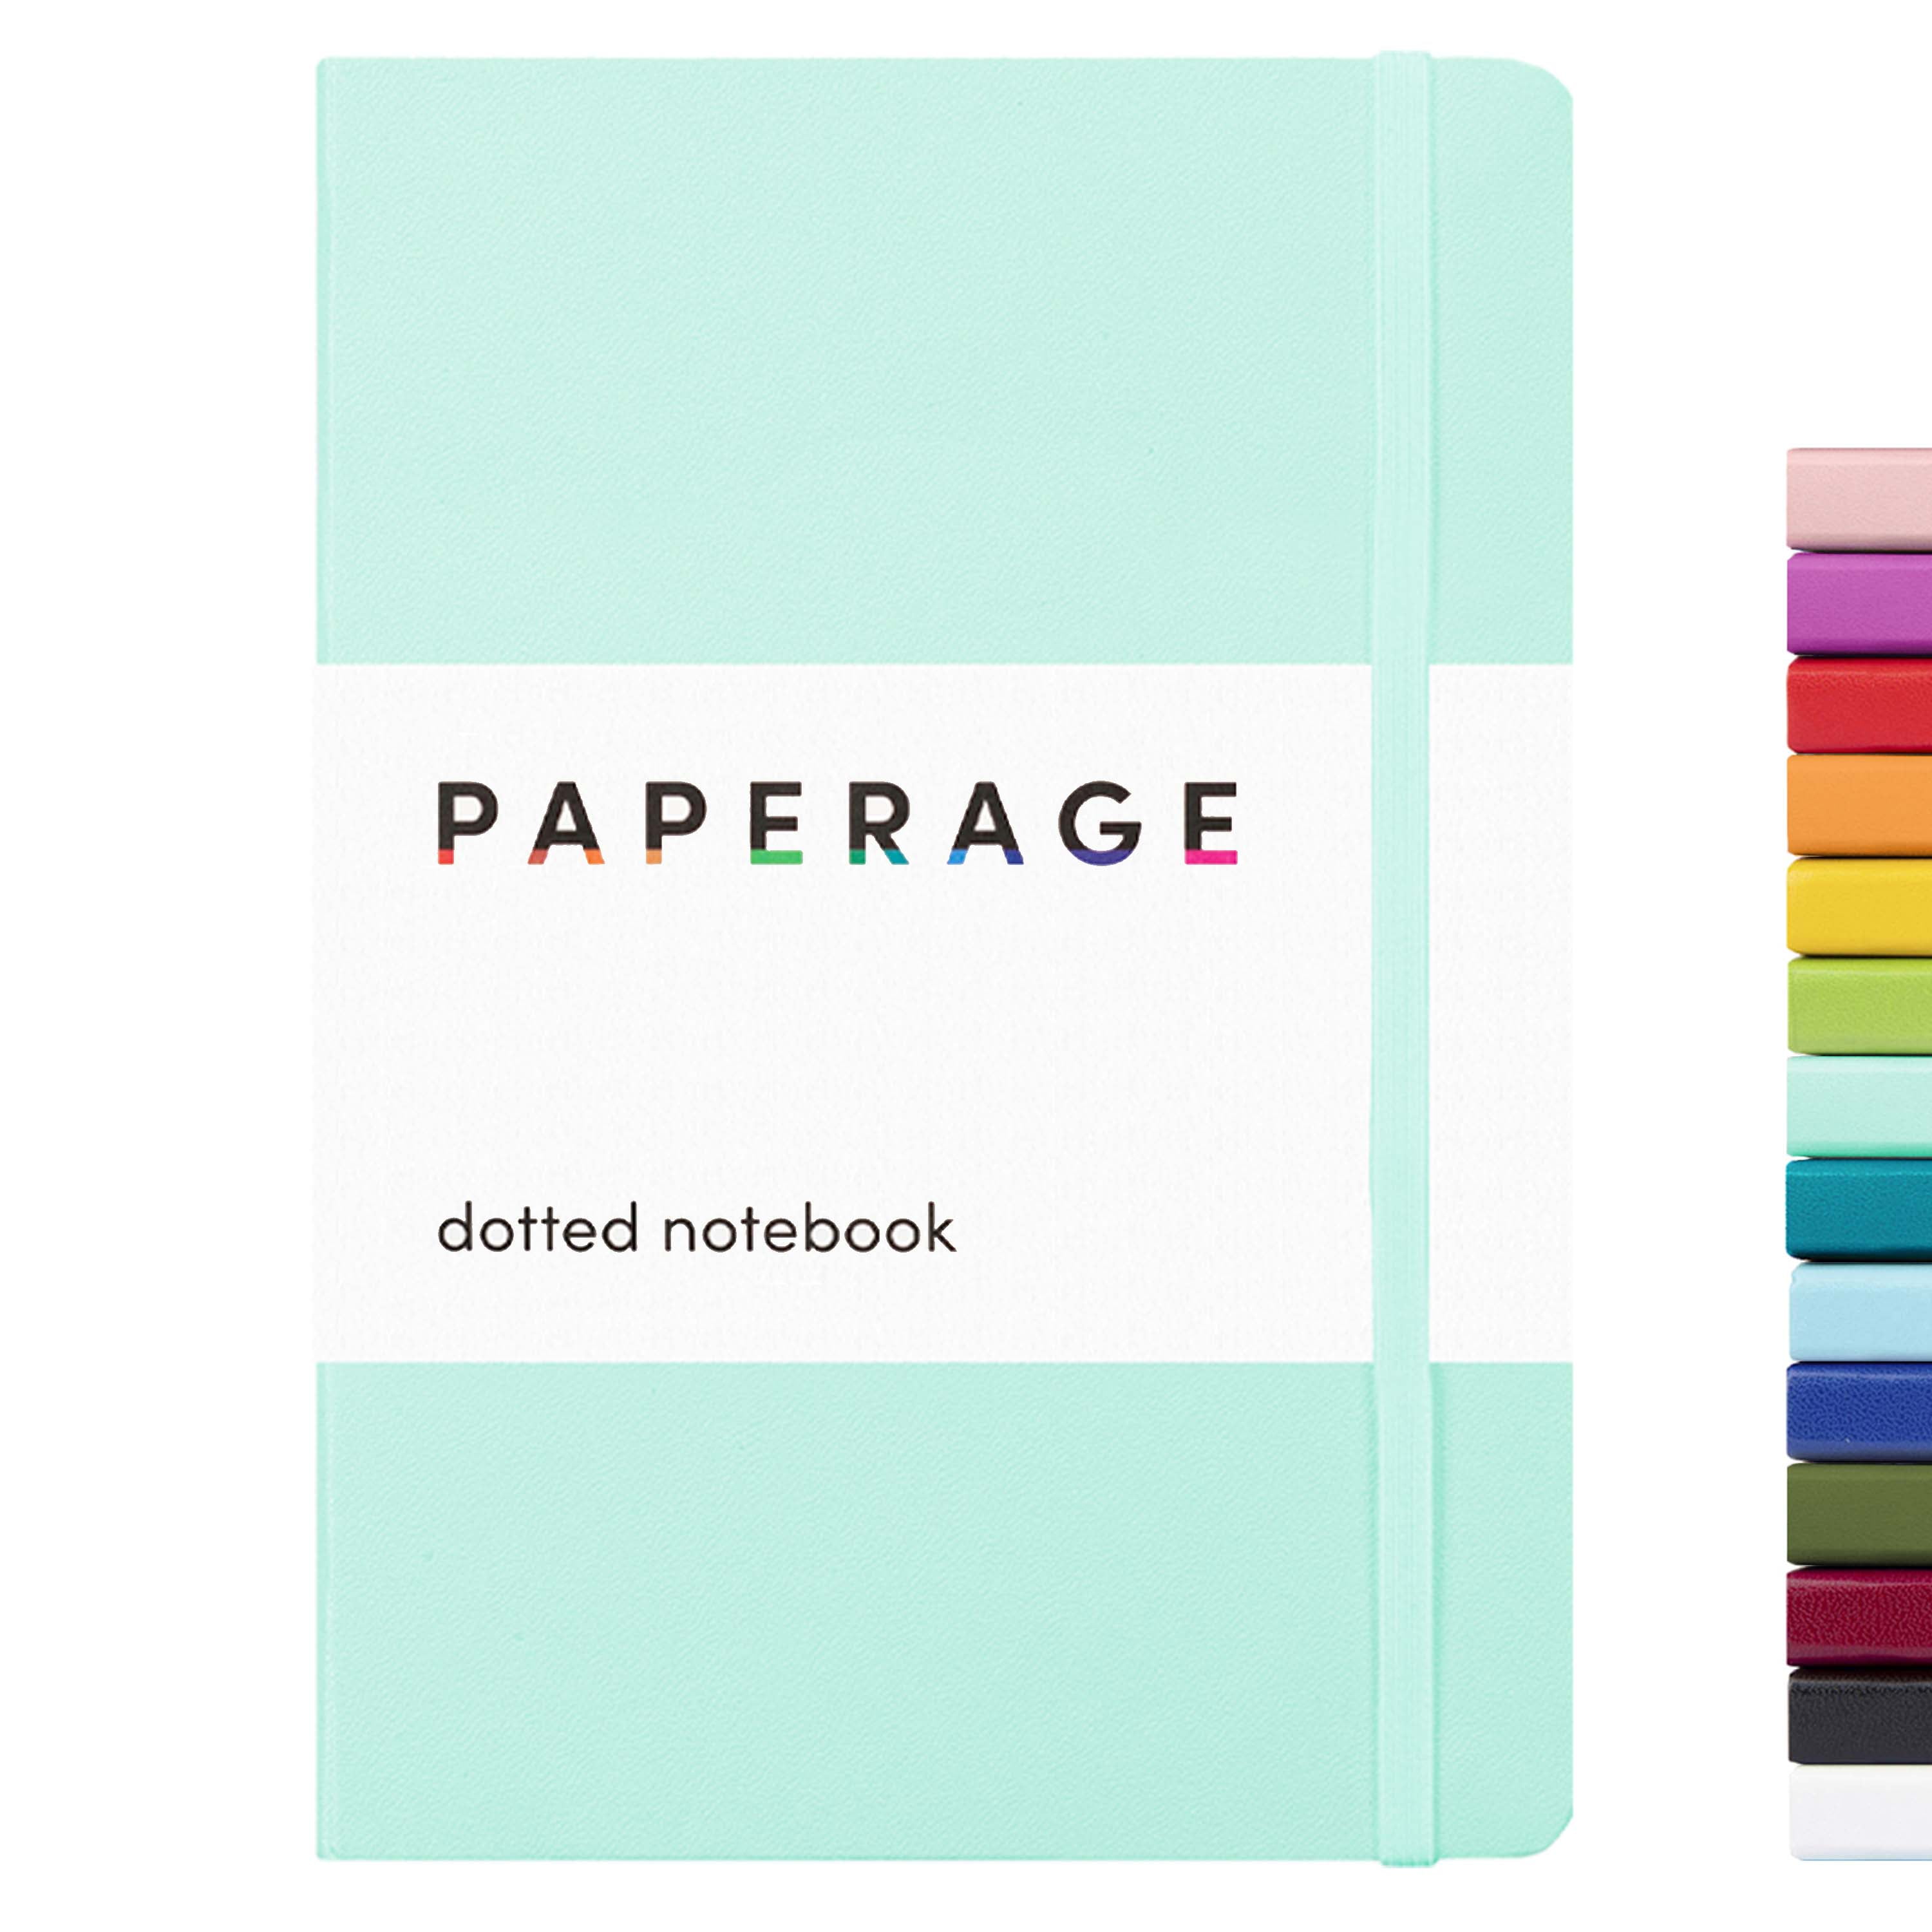 PAPERAGE Dotted Journal Notebook, (Mint), 160 Pages, Medium 5.7 Inches x 8 Inches - 100 GSM Thick Paper, Hardcover